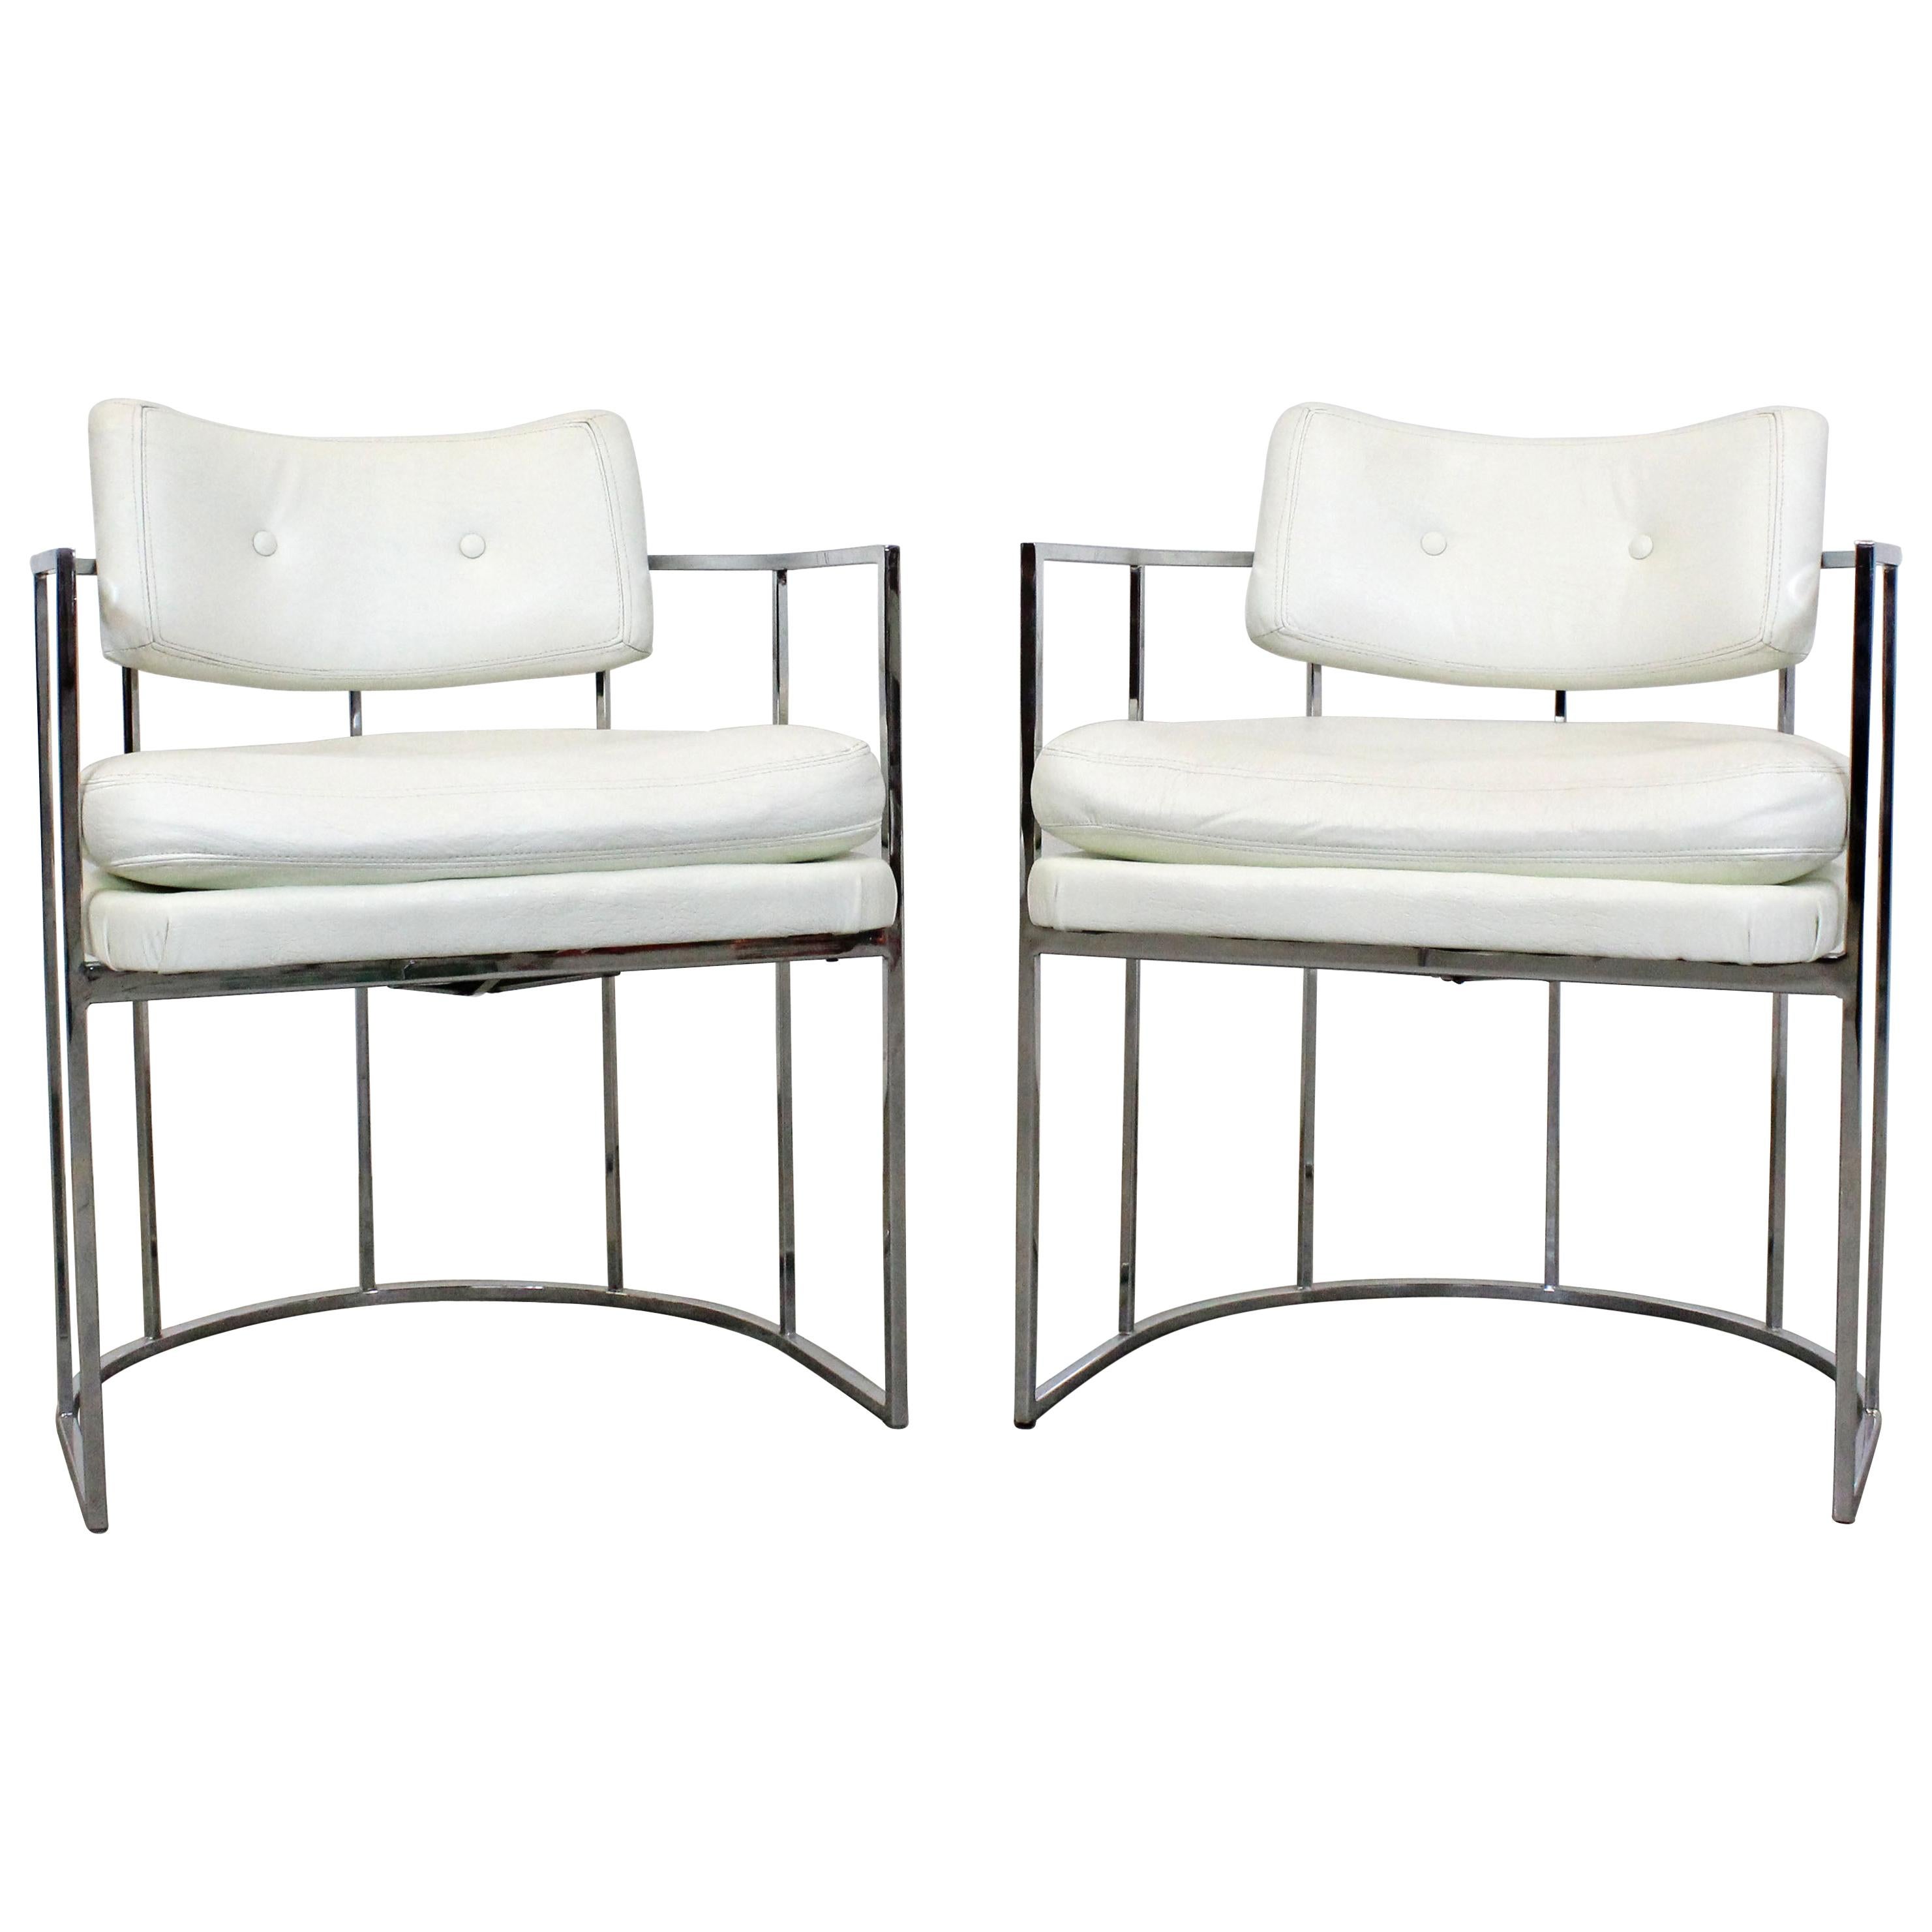 Pair of Mid-Century Modern Milo Baughman for Thayer Coggin Chrome Dining Chairs